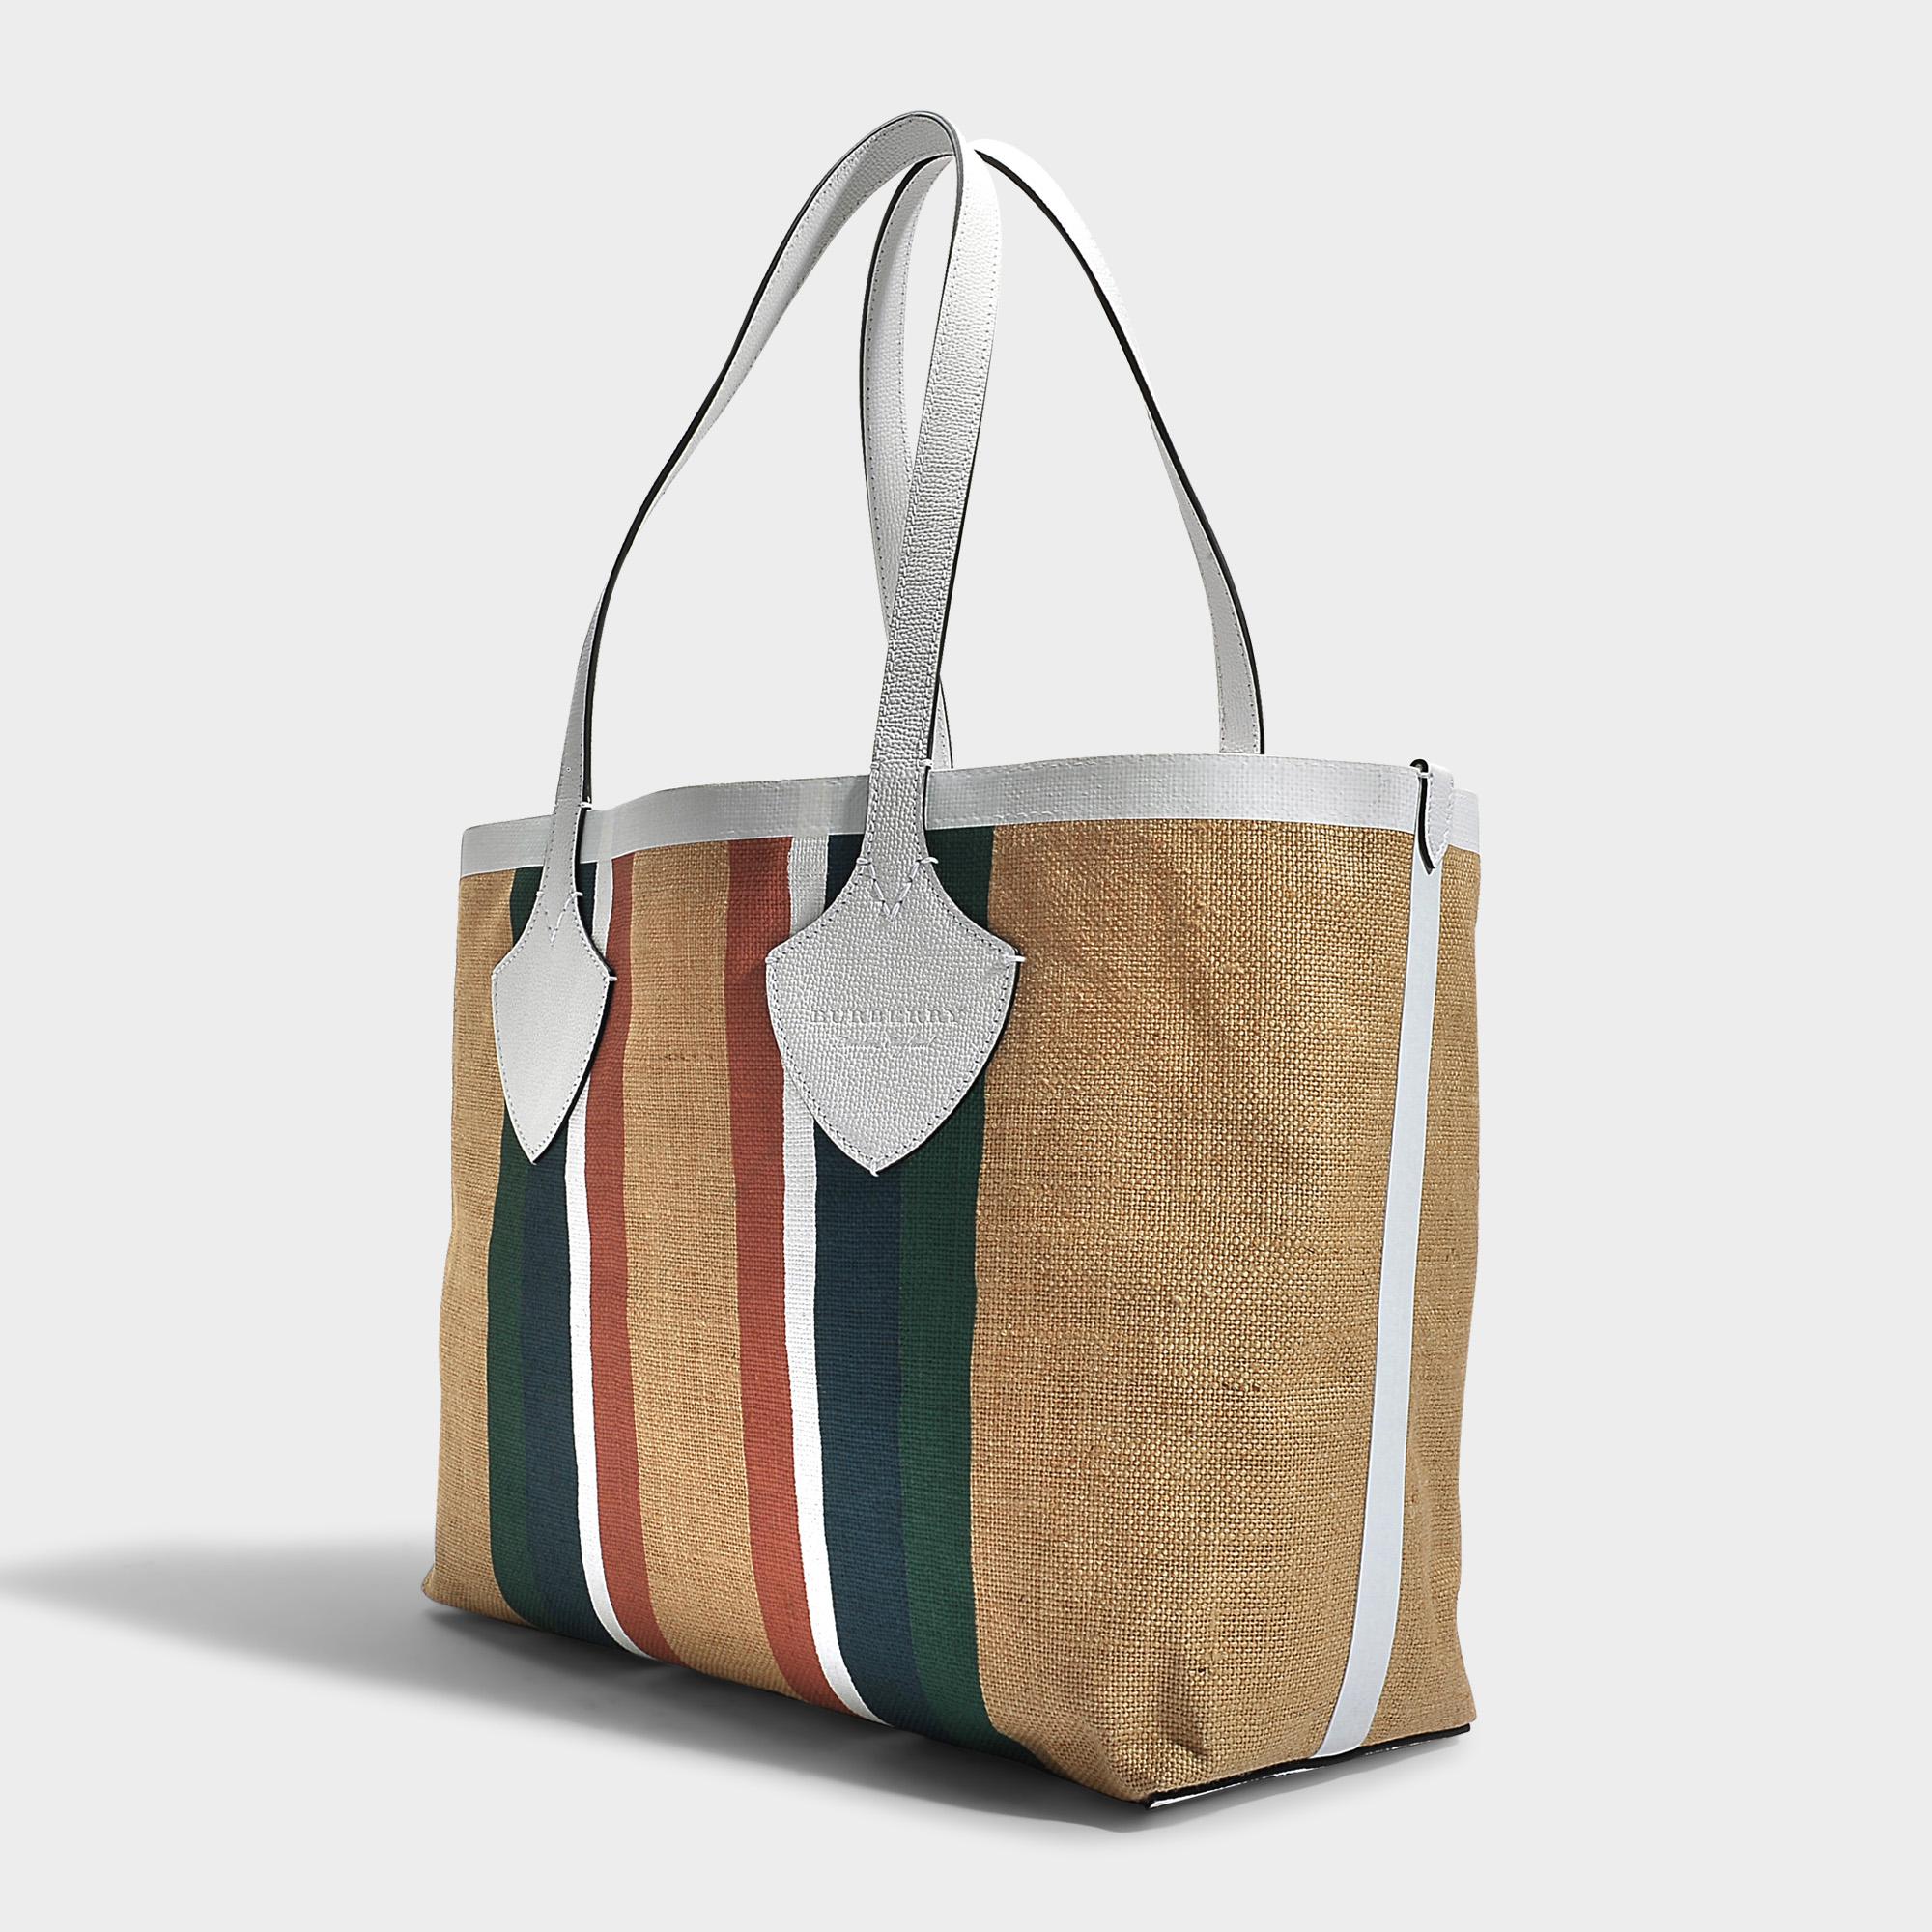 Burberry Canvas The Giant Medium Tote Bag In Chalk White Jute Stripes - Lyst